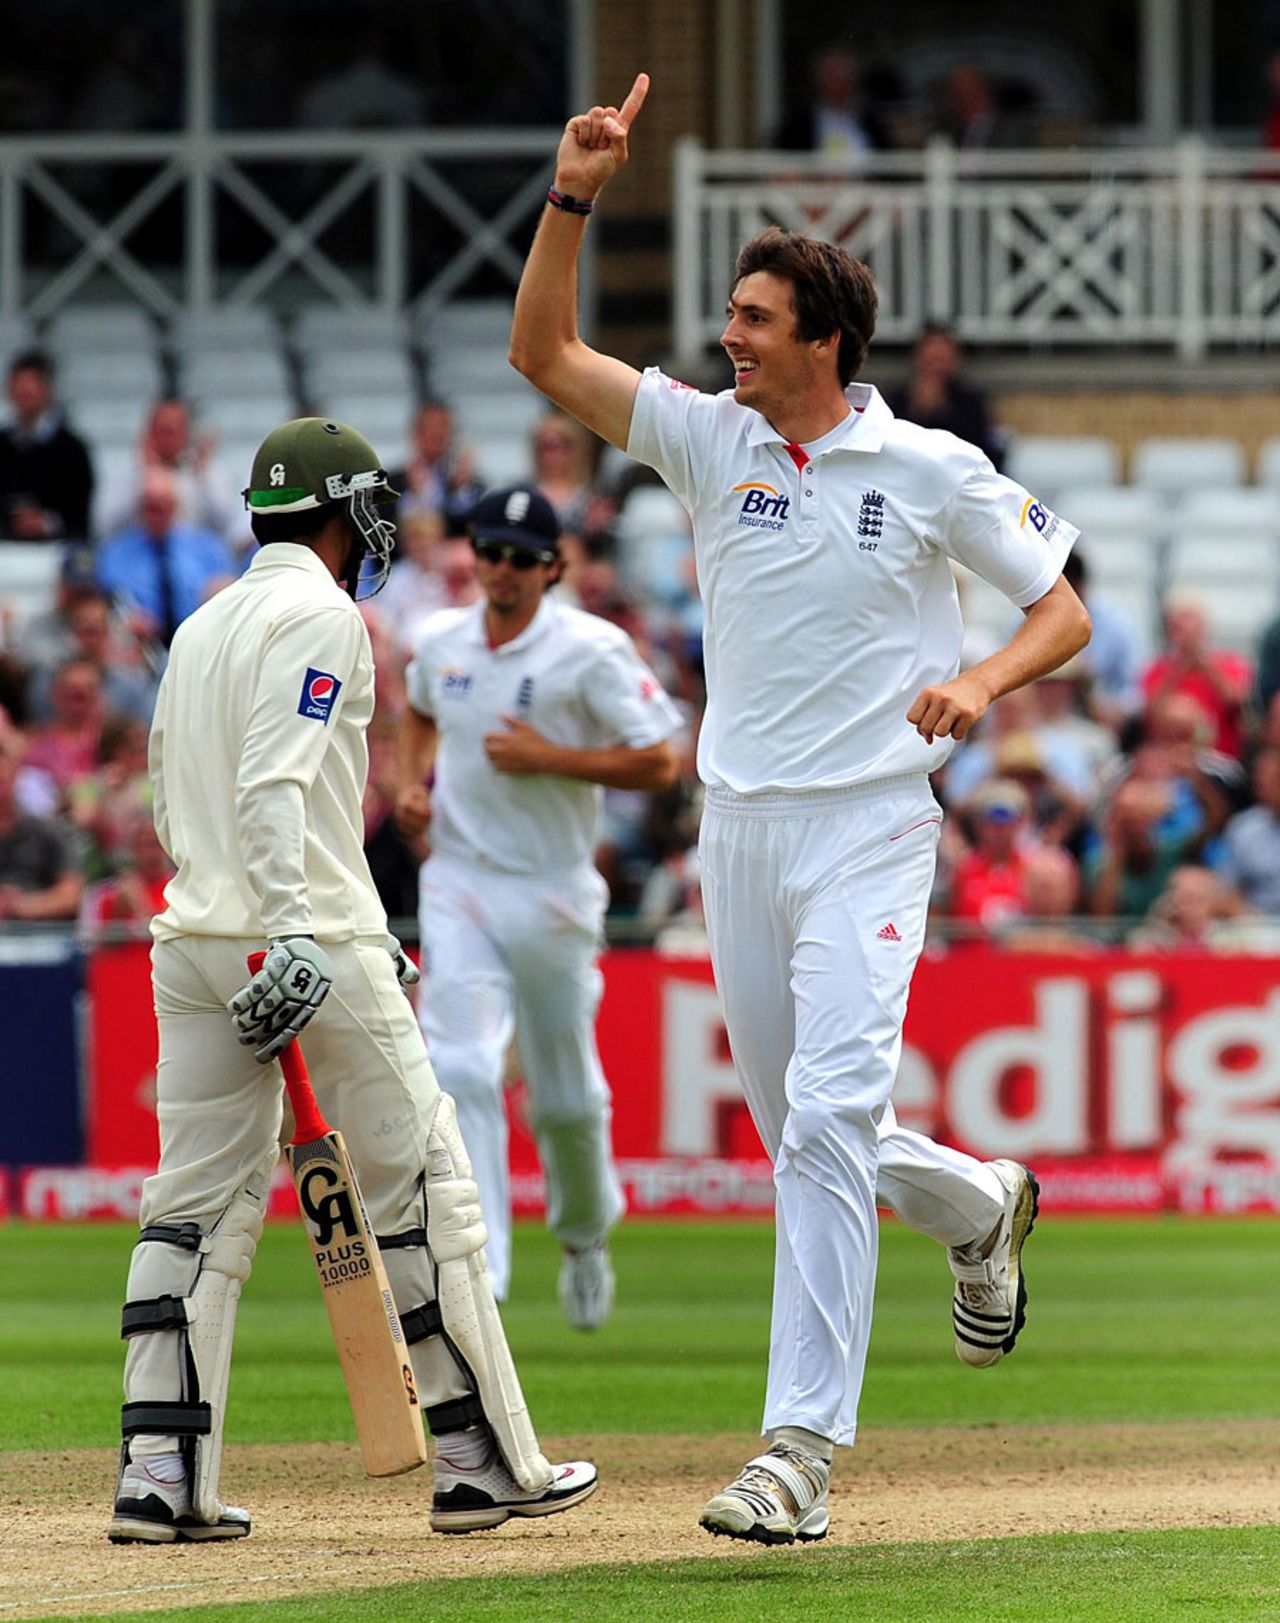 Steven Finn made a strong return to international duty picking up Umar Amin in his first over, England v Pakistan, 1st Test, Trent Bridge, 2nd day, July 30, 2010